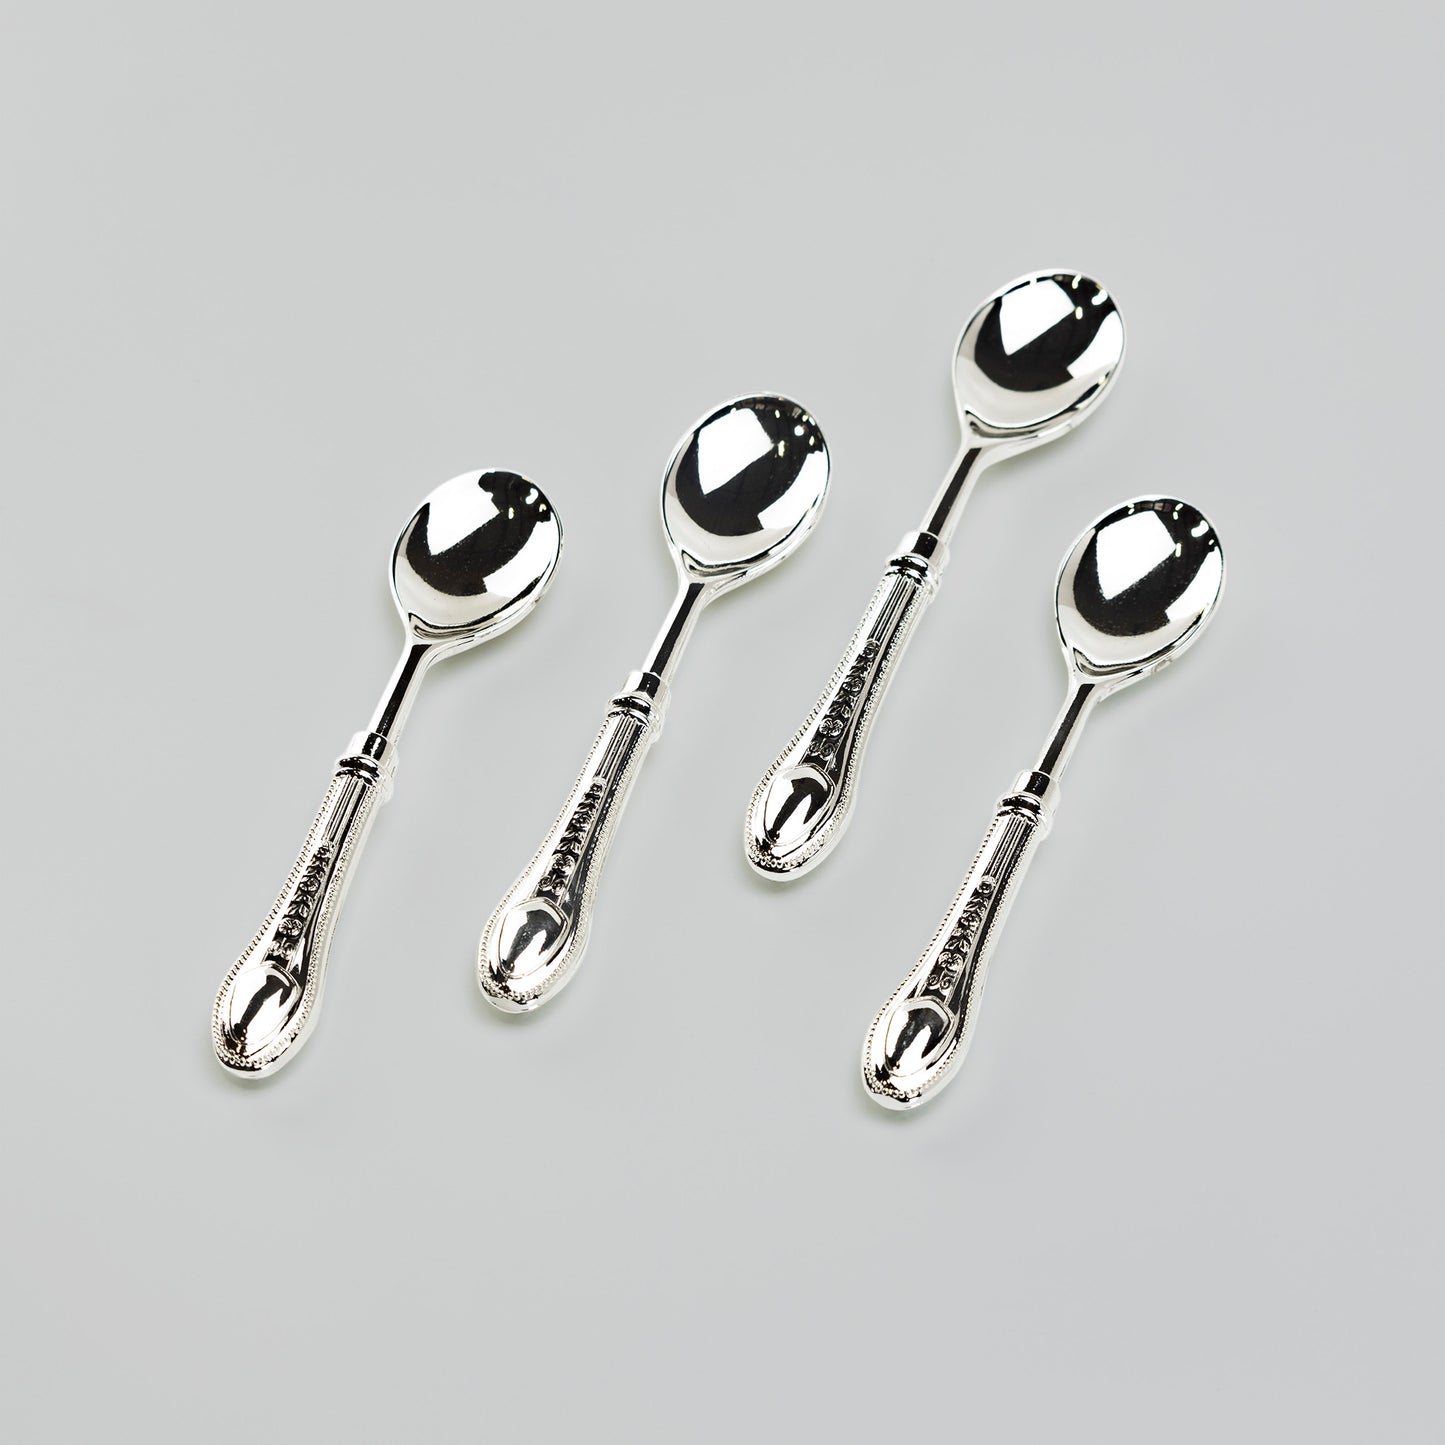 Silver Plated Demi Spoon Set of 4 with Antique Rose Handle Design